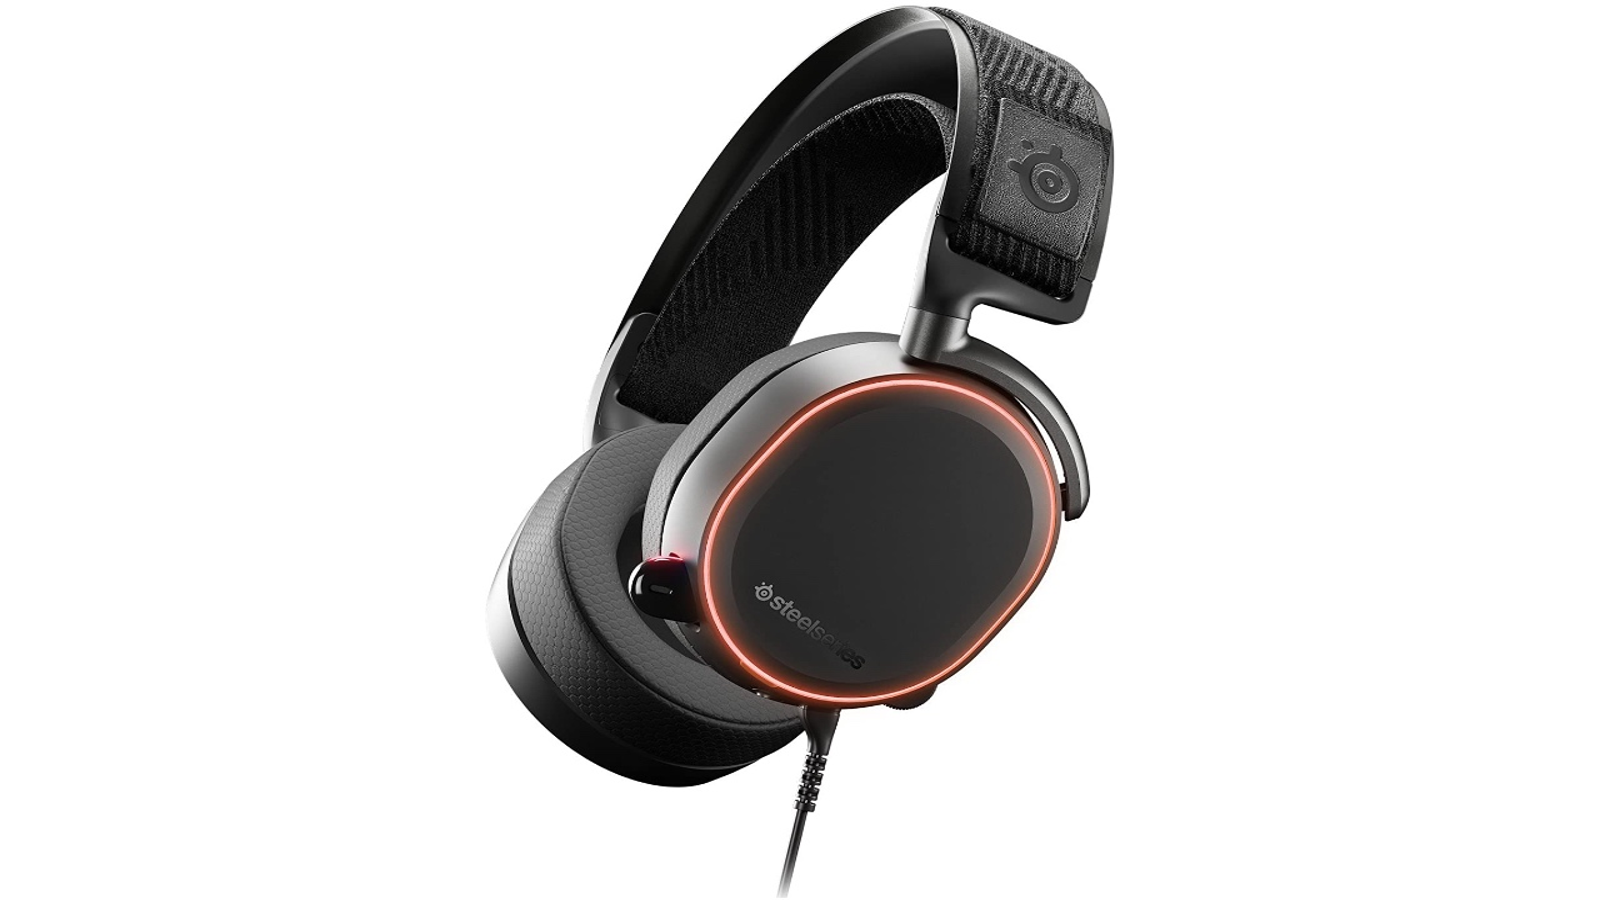 The brilliant SteelSeries Arctis Pro wireless headset is the